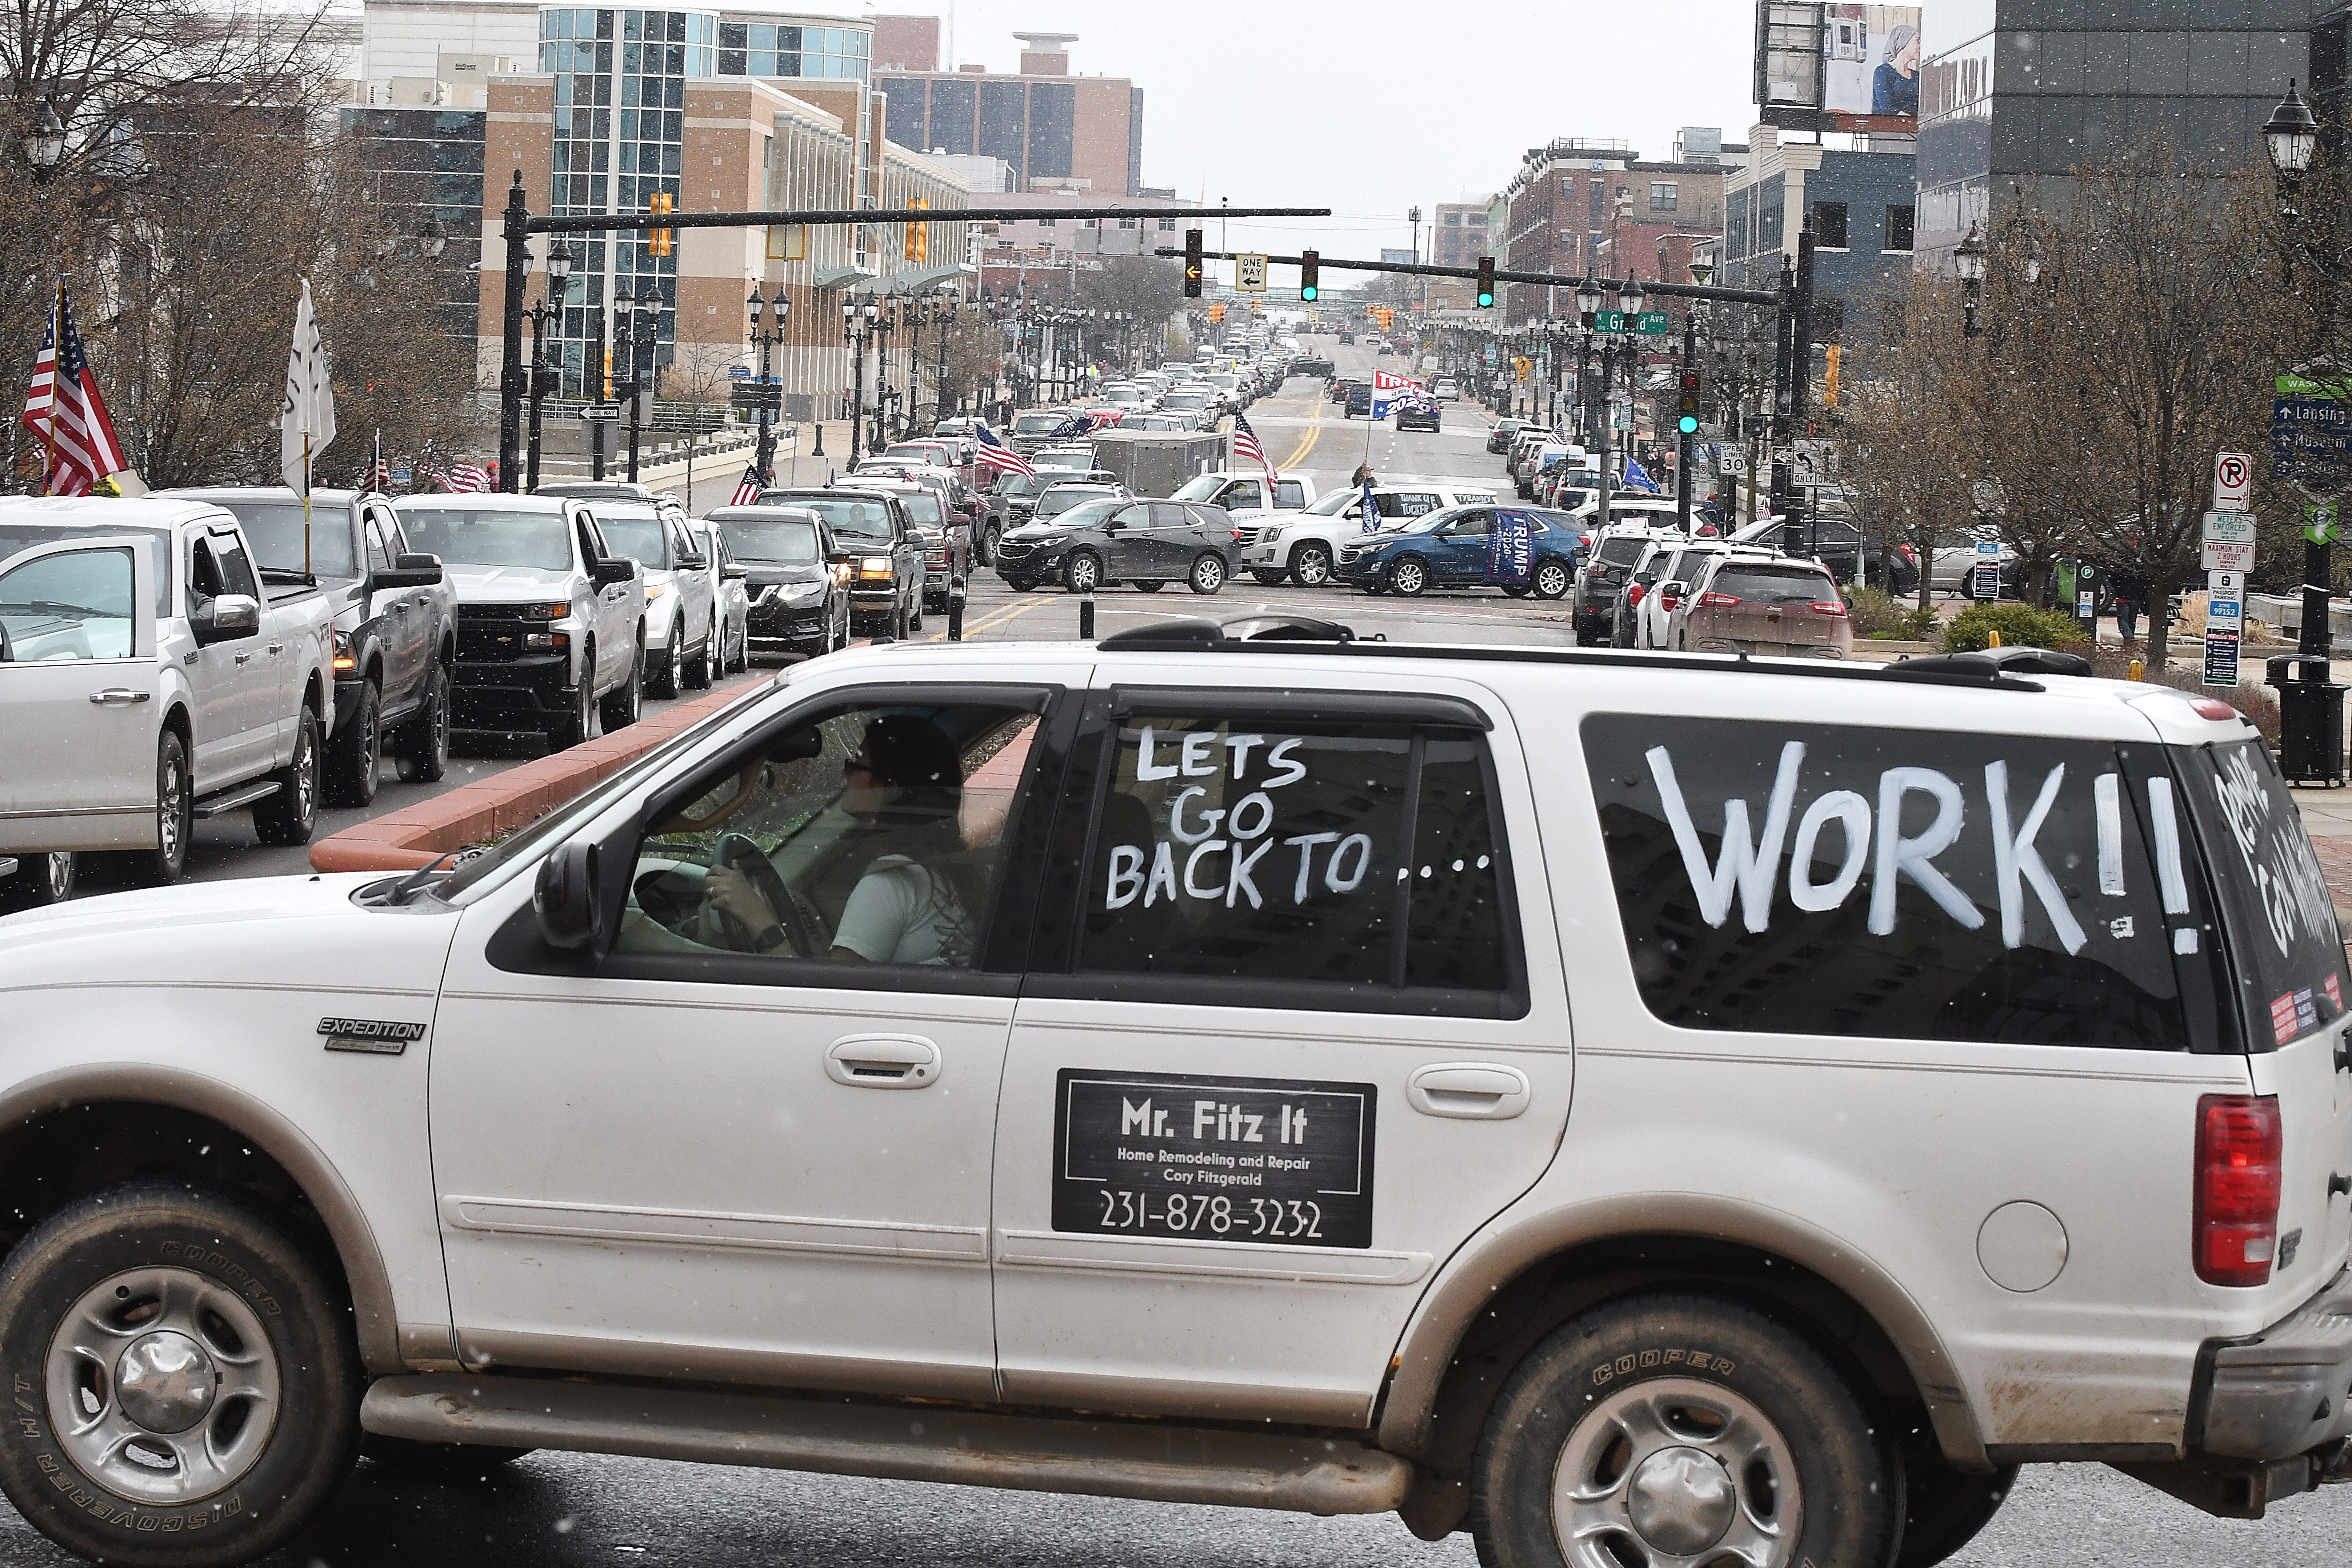 People in vehicles protest the Governor's stay home order during "Operation Gridlock" in Lansing Wedesday.